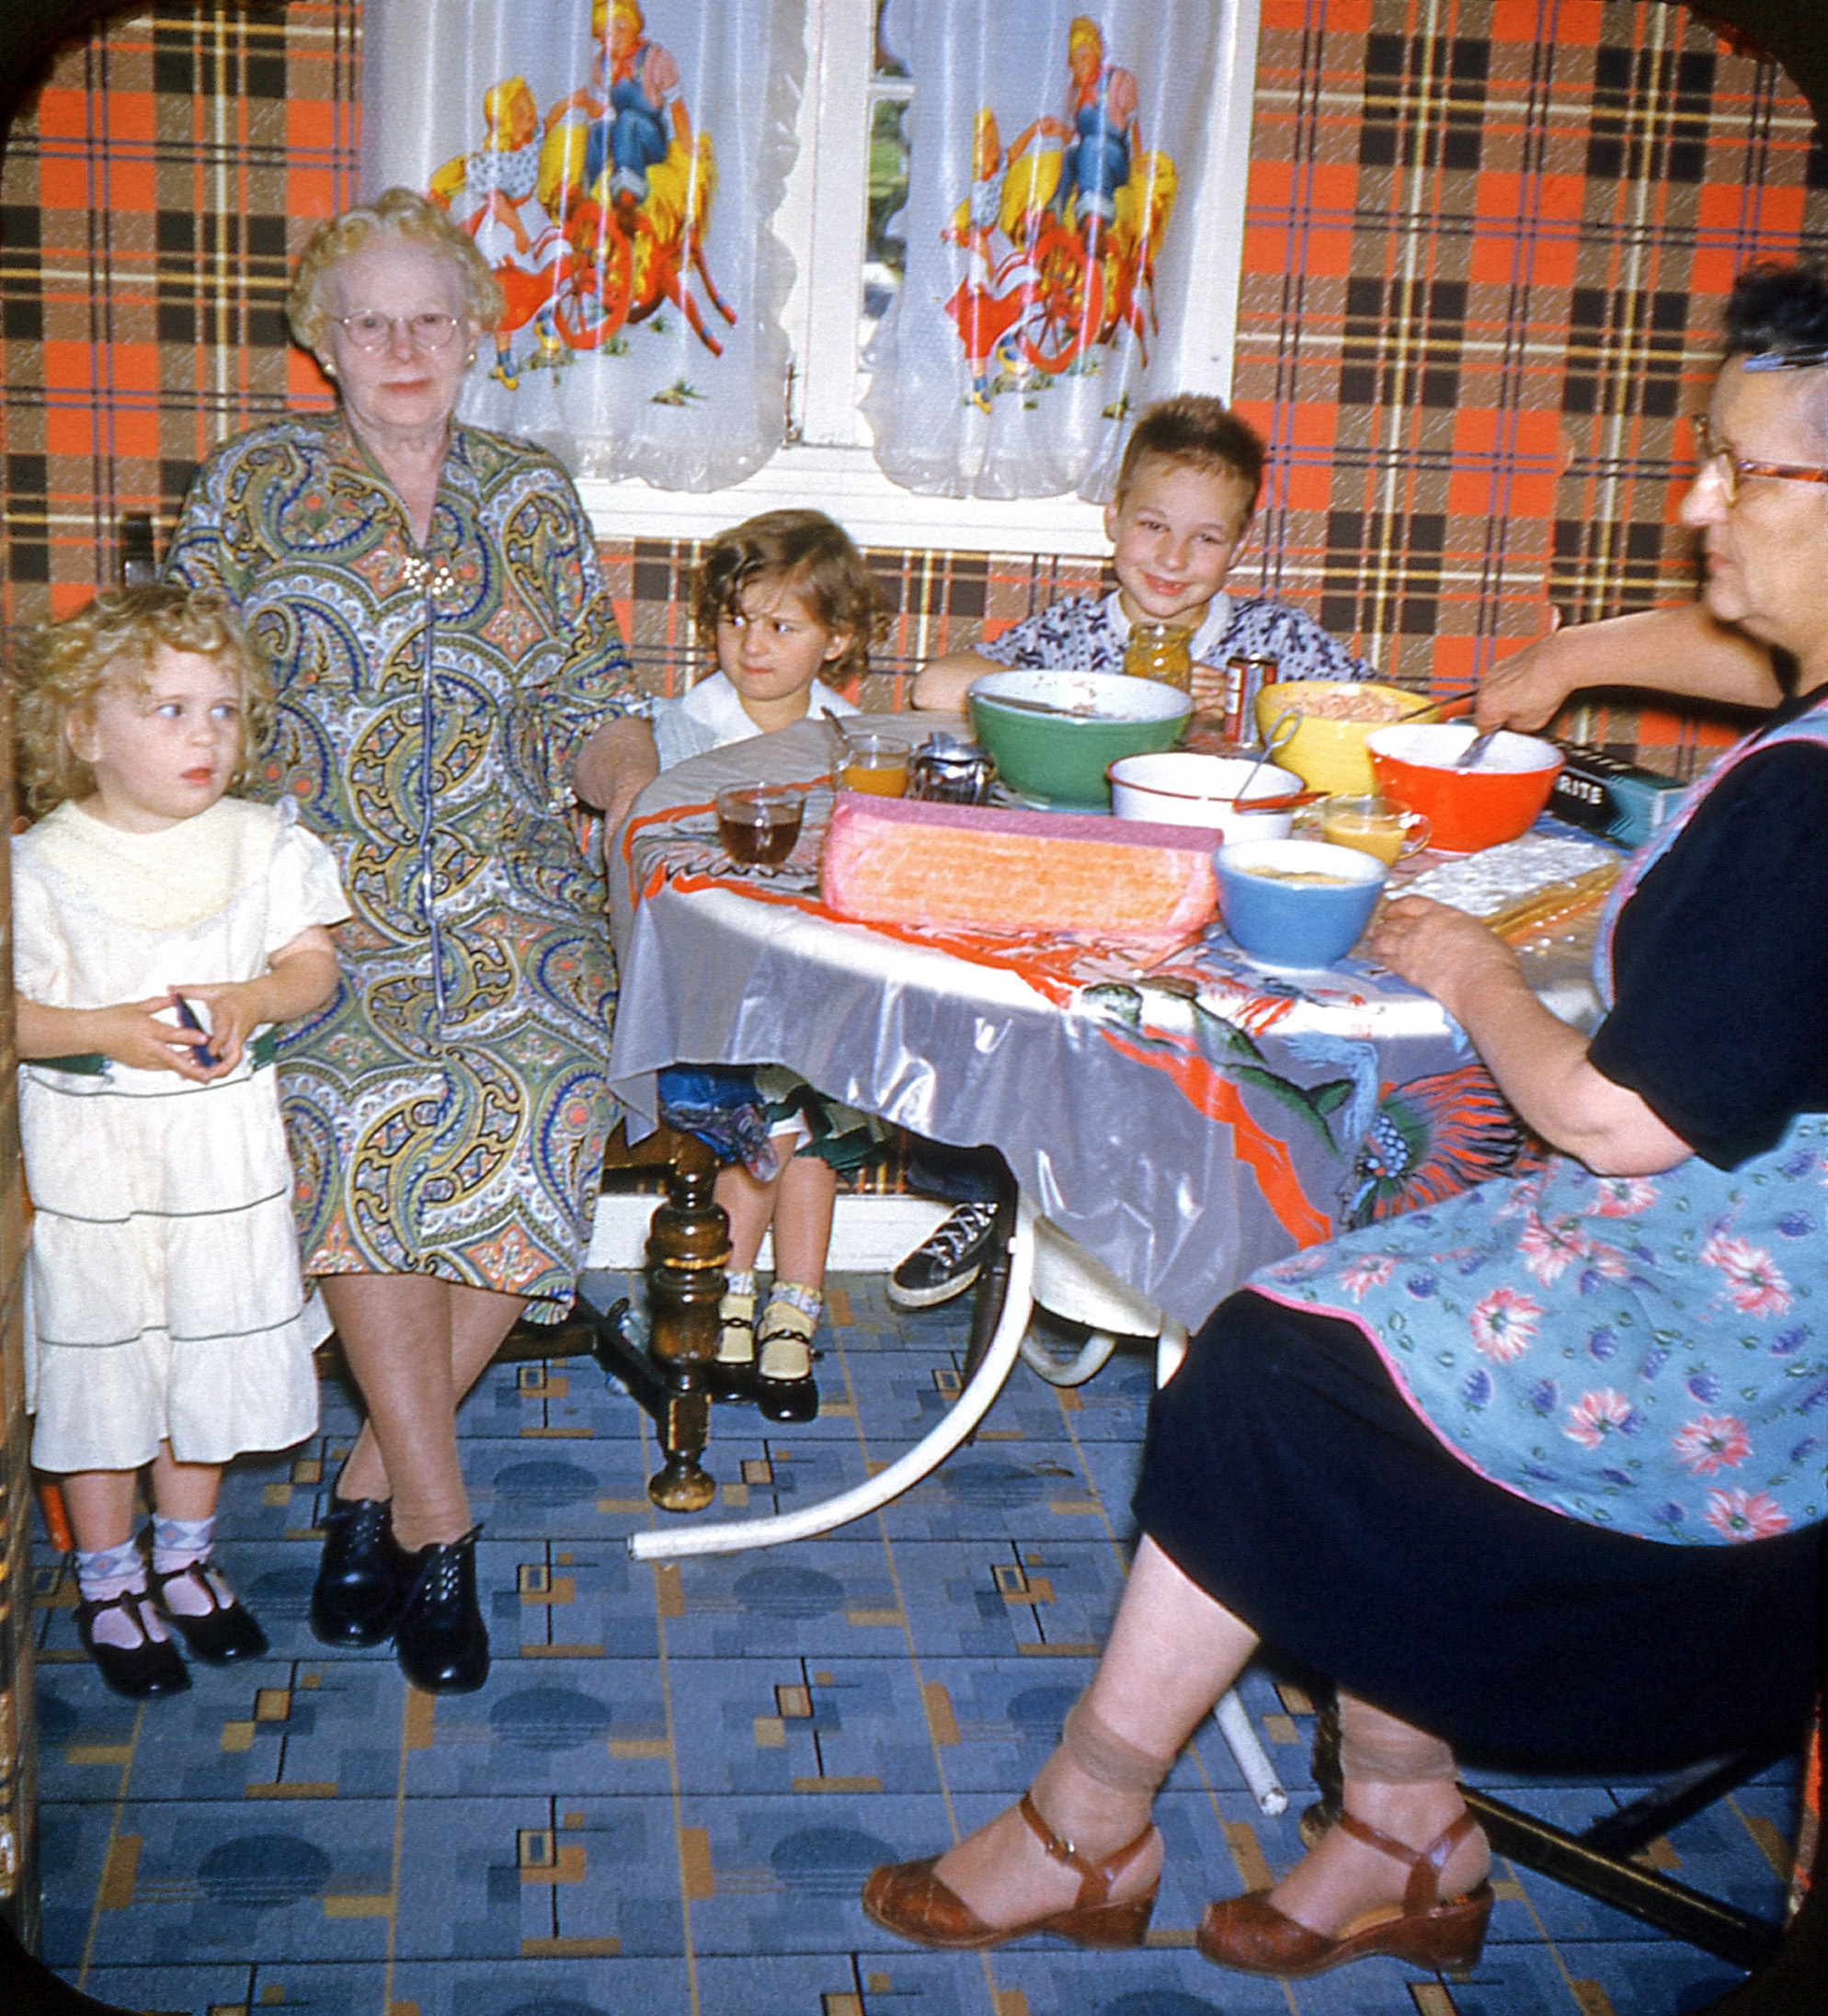 A mad clash of colors and styles in this vintage Kodachrome; I love it all, but not all in the same room. It's one side of a mounted 3-D pair from a collection found in a thrift store. I'm fairly certain the woman making the cake is the mother of the young boy behind the table, but I'm not sure of the others. View full size.